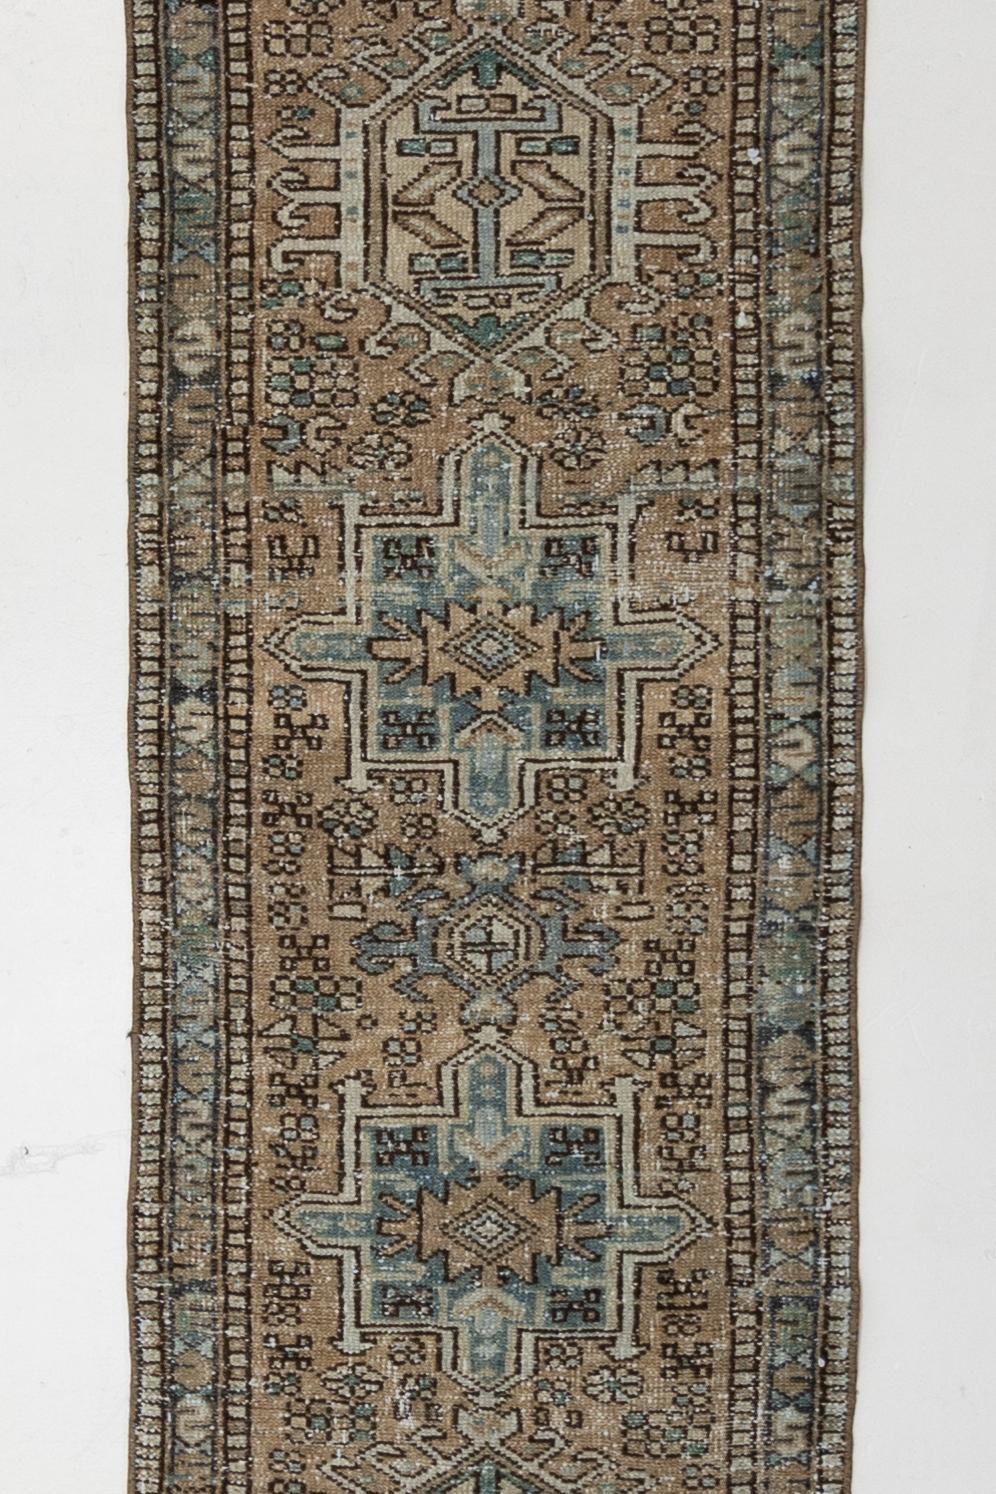 Age: Circa 1940

Colors: tan, blue, brown, black, teal

Pile: low

Wear Notes: 2

Material: Wool on cotton. 

Early to mid 20th century Persian Karaja with a warm tan field and blue medallions that are symbolic of regional insects and foliage.